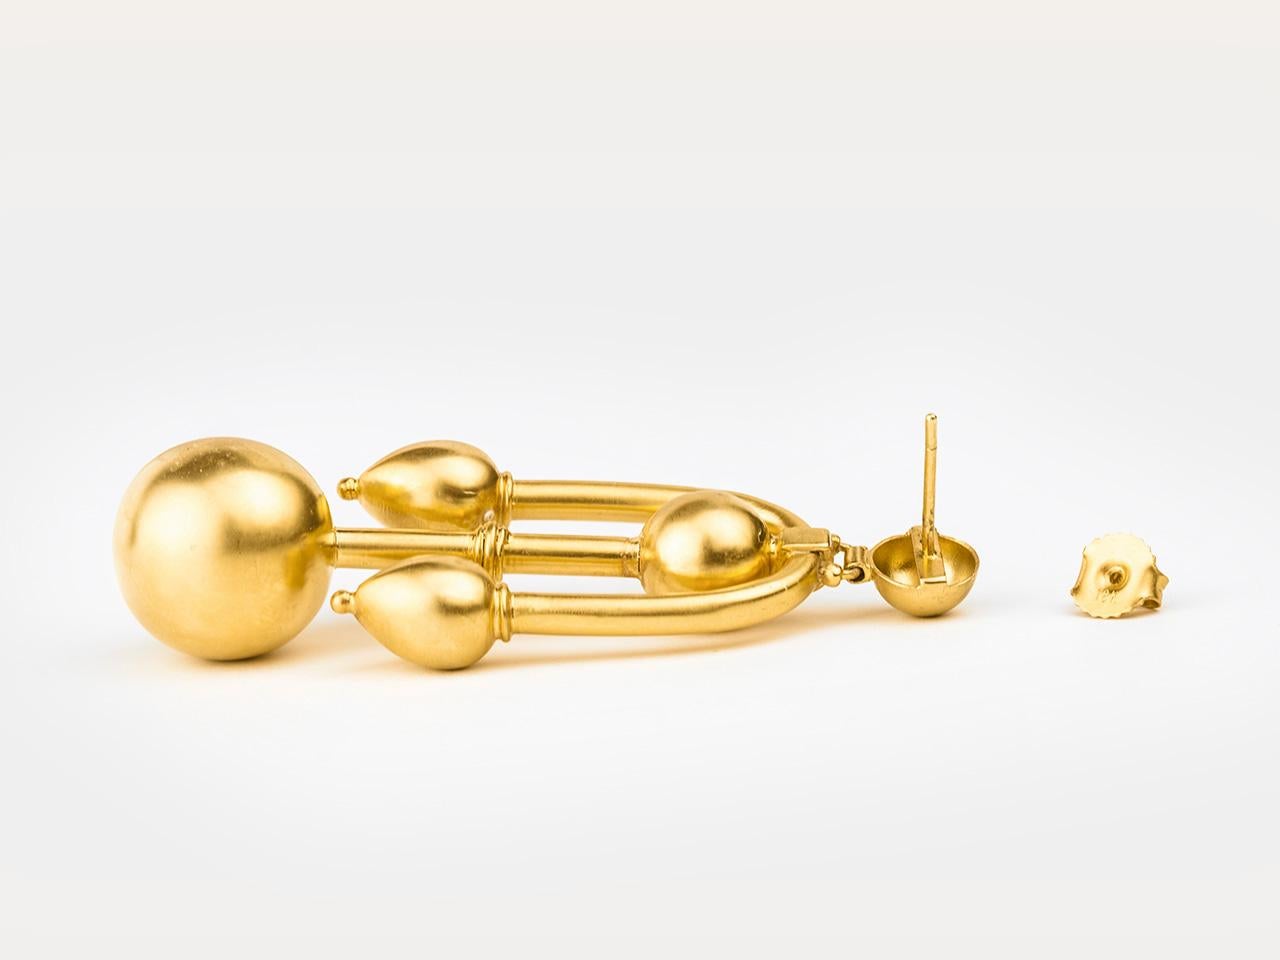 18k Gold Earclips in a Victorian style design.